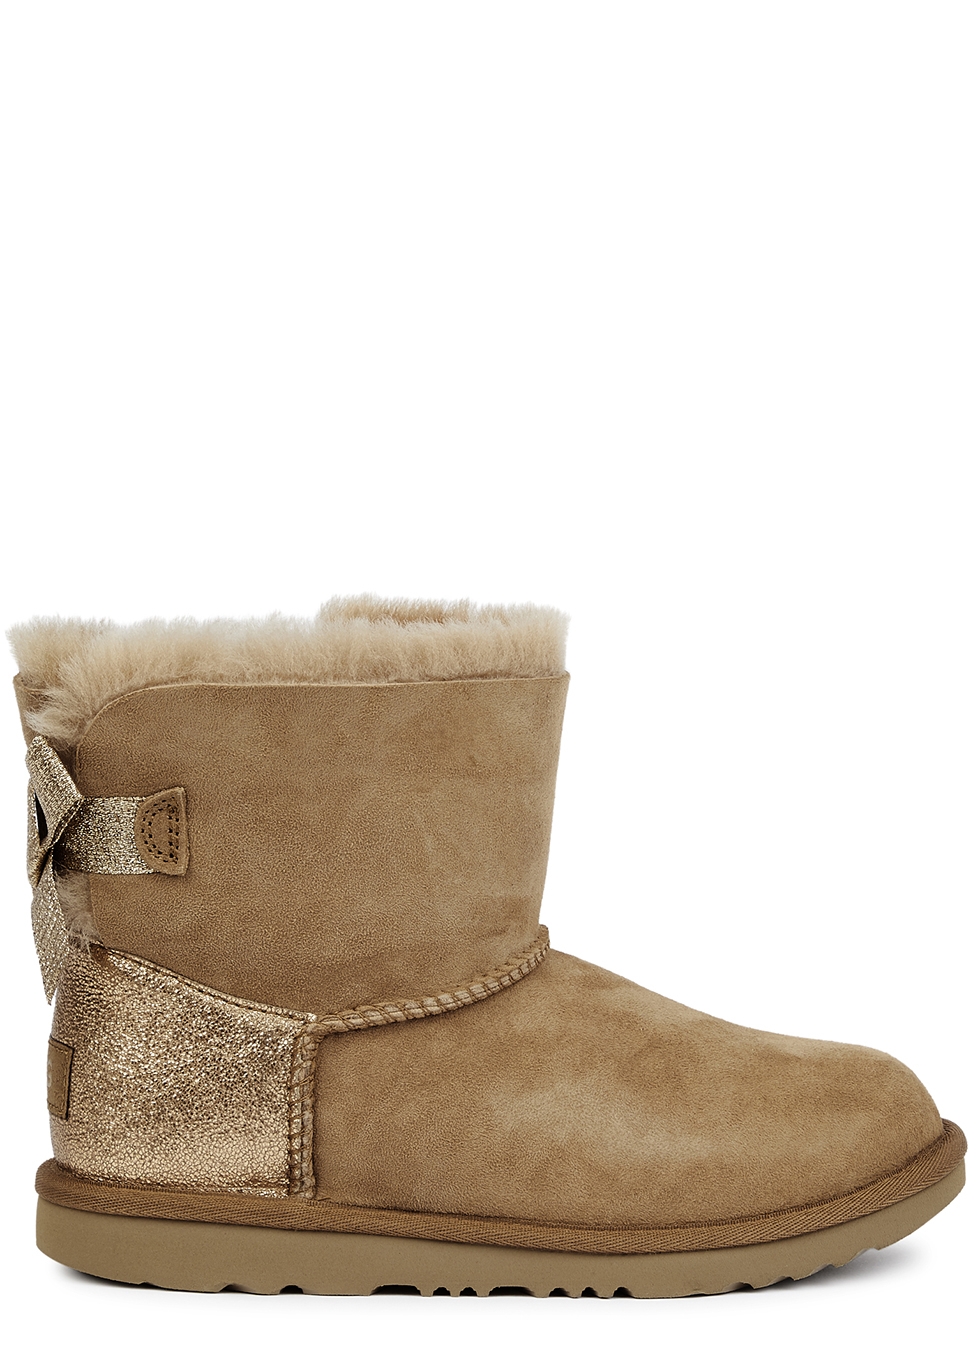 KIDS Bailey Bow mini brown suede ankle boots (IT31-IT38)